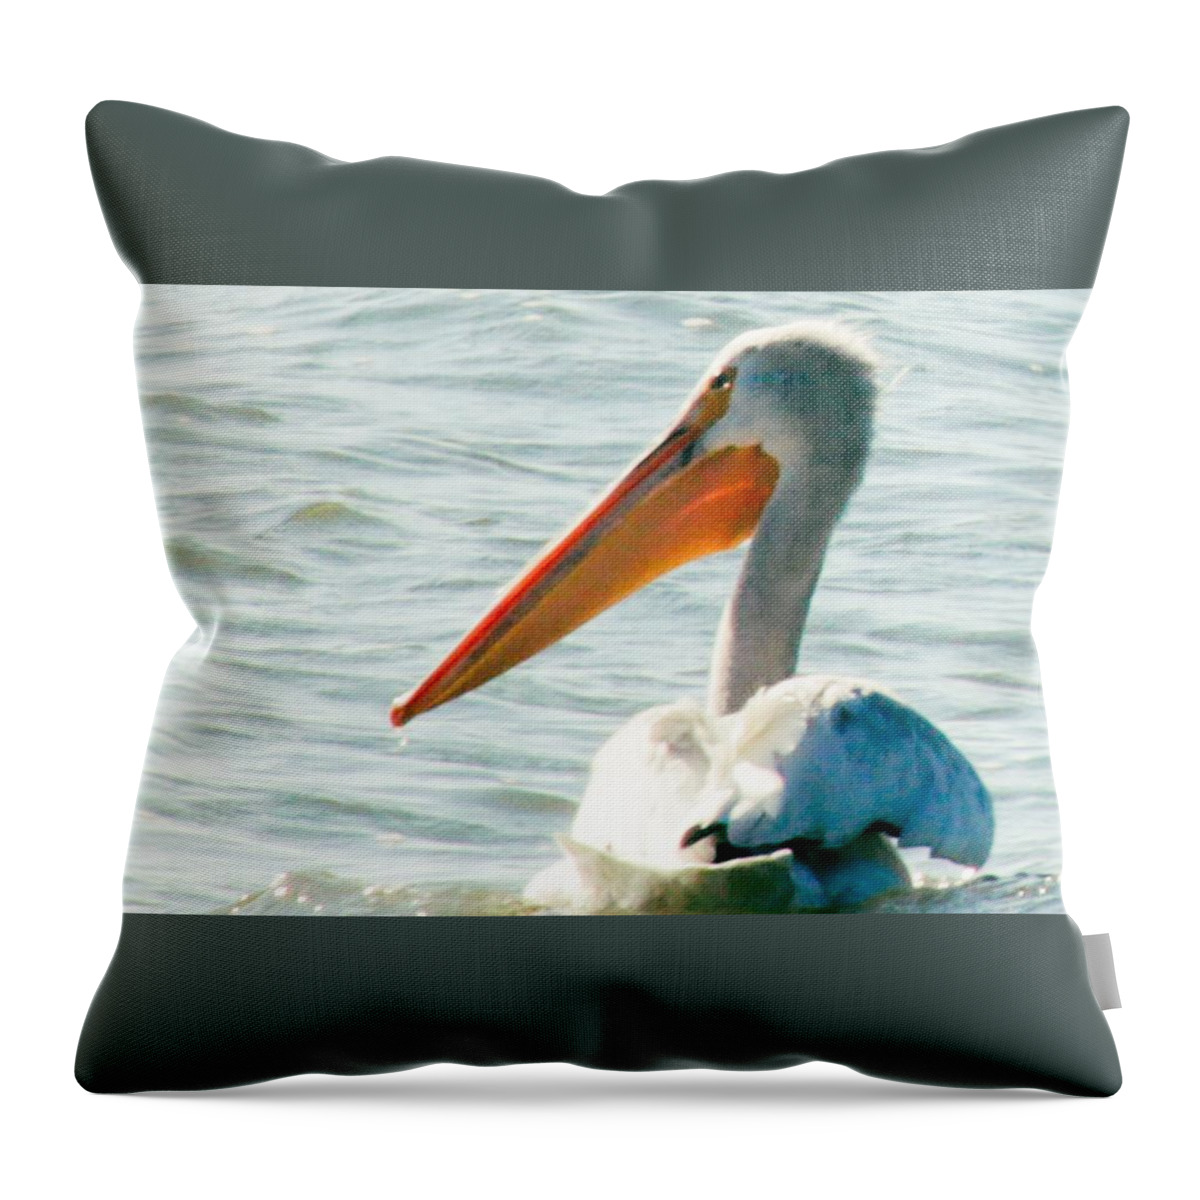 Lake Michigan Throw Pillow featuring the photograph Peaceful Morning by Windshield Photography